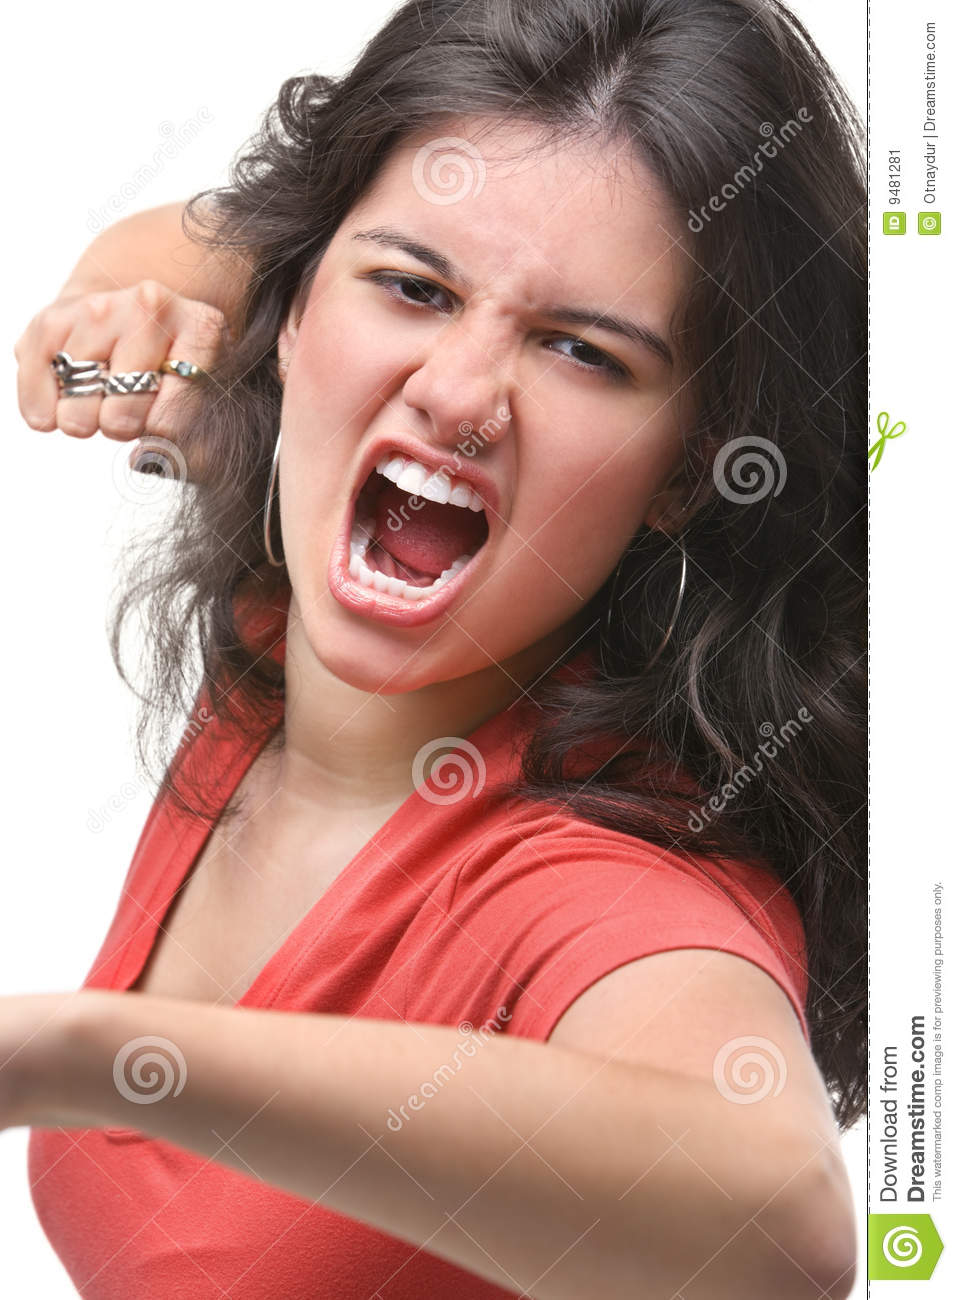 Young Female Expressing Her Anger Stock Image   Image  9481281